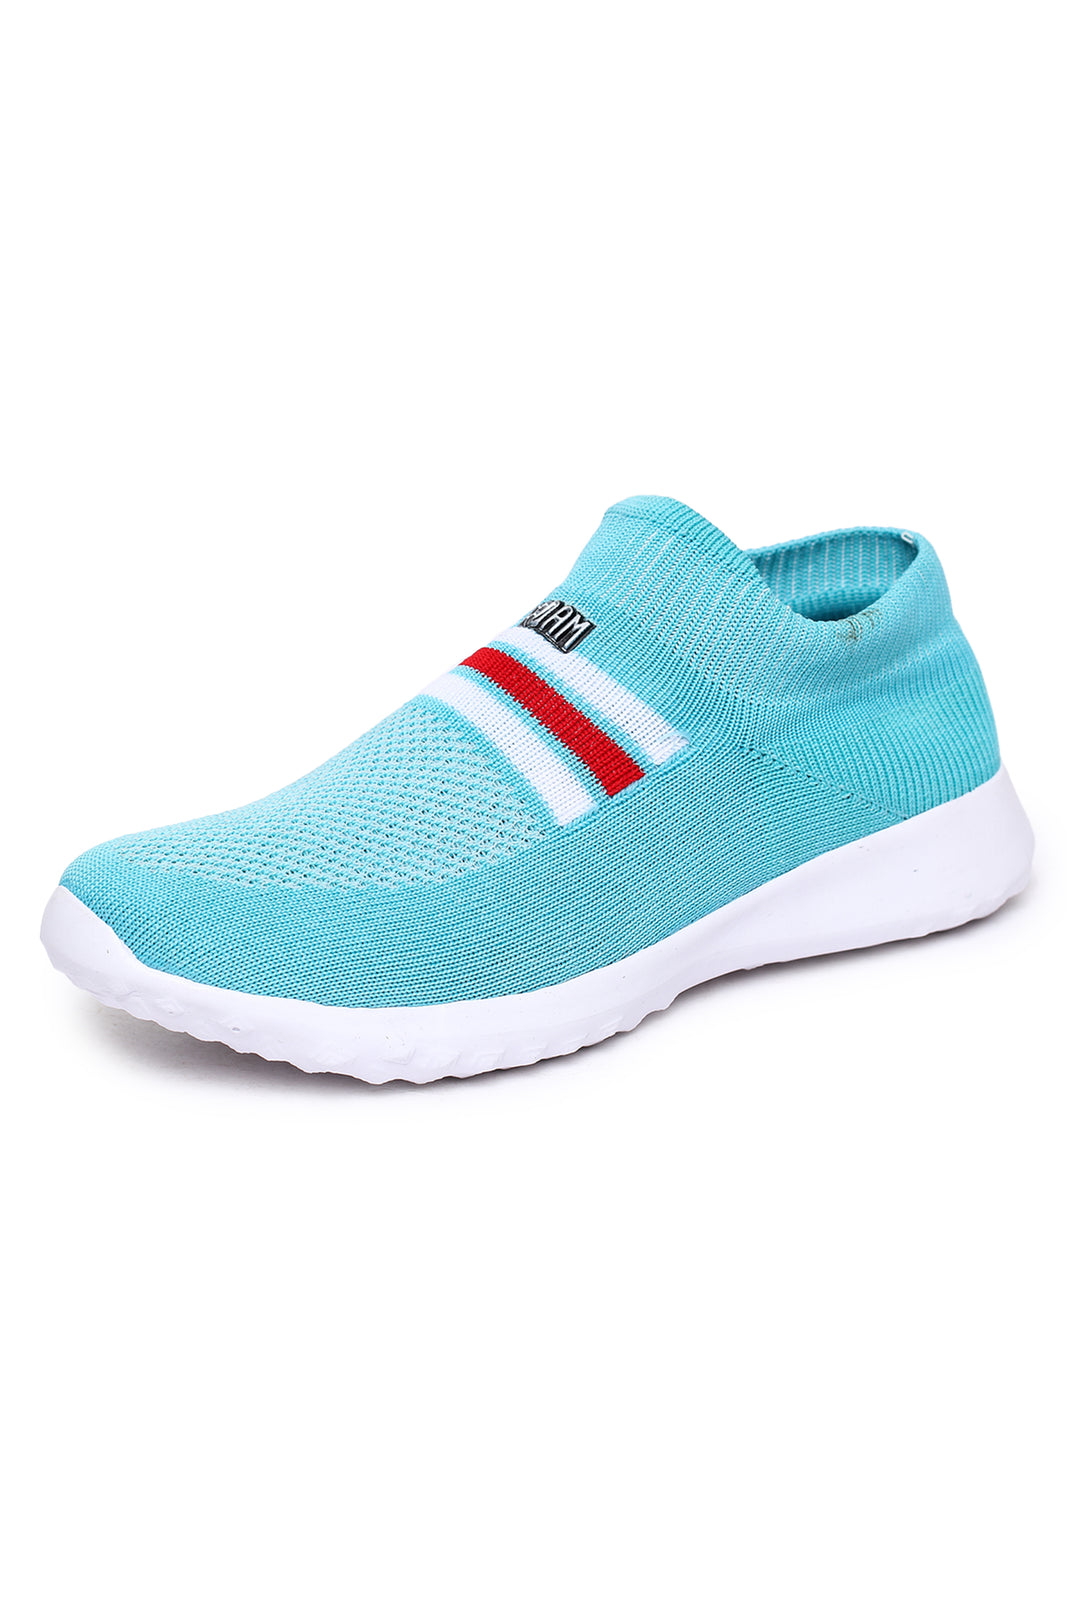 Black White Blue Yellow Red Men High fashion solid sport sneakers at Rs  770/piece in Haridwar